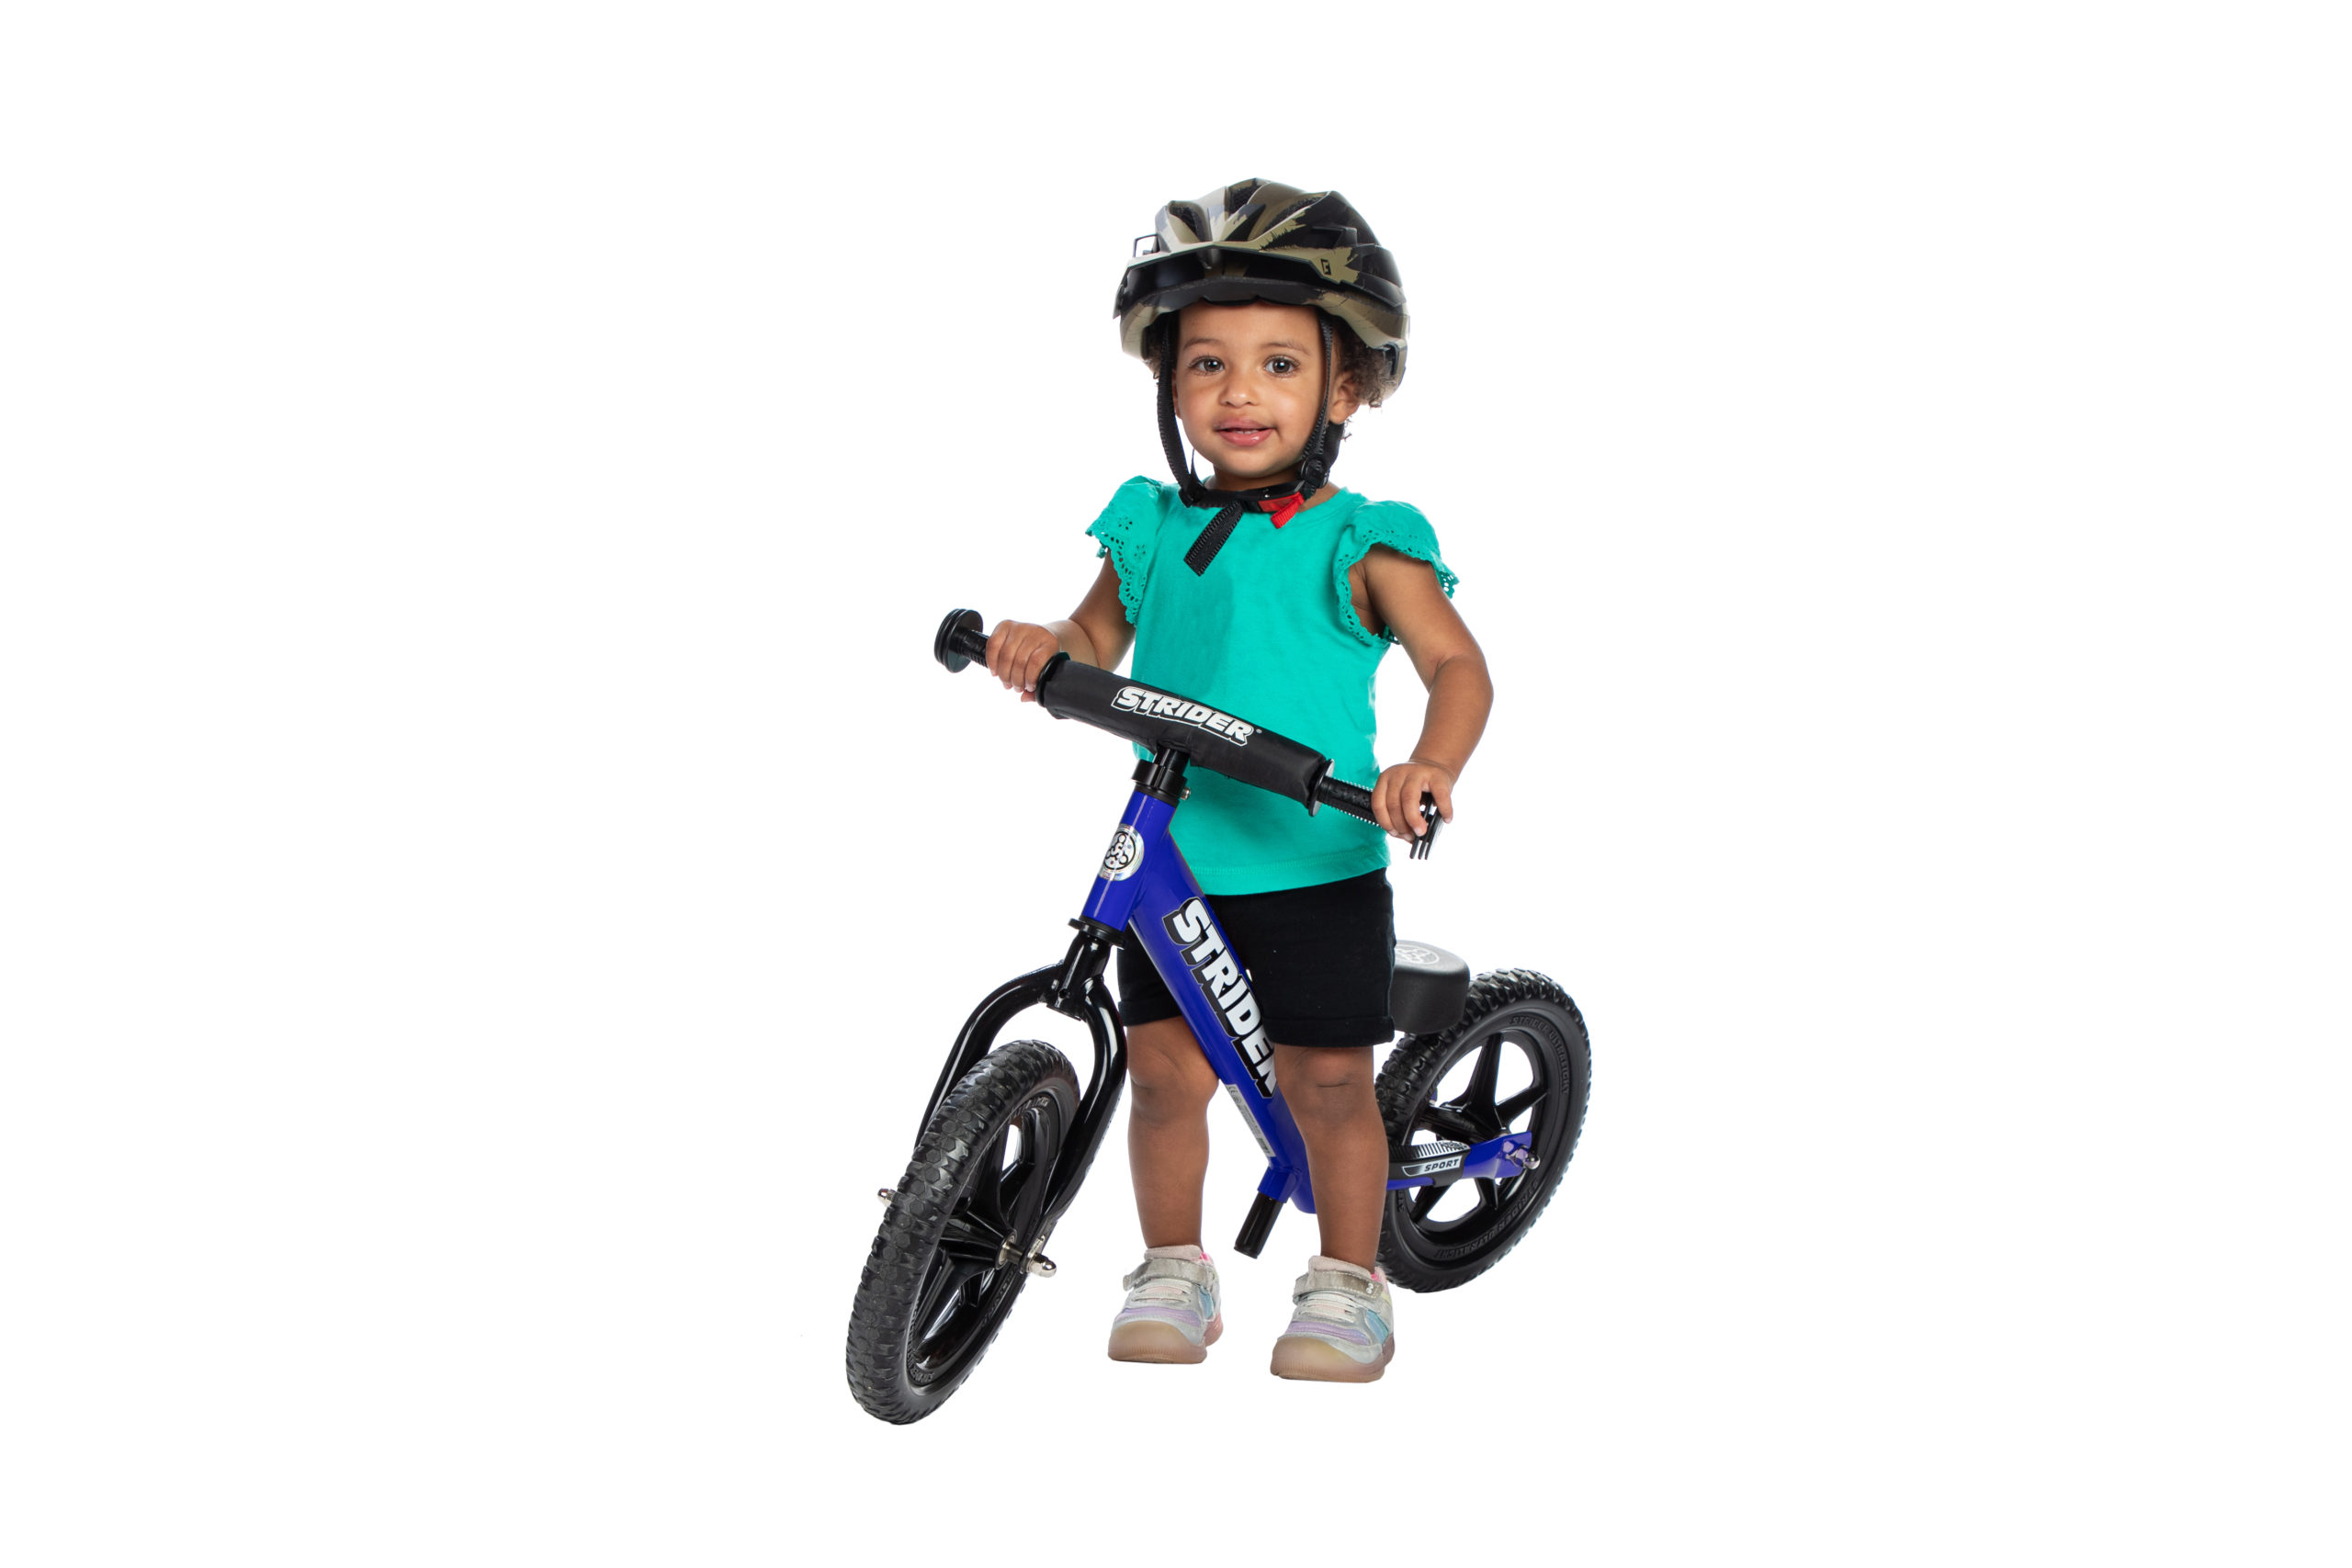 12 Sport Balance Bike Ages 18 Months to 5 Years Black for sale online Strider 